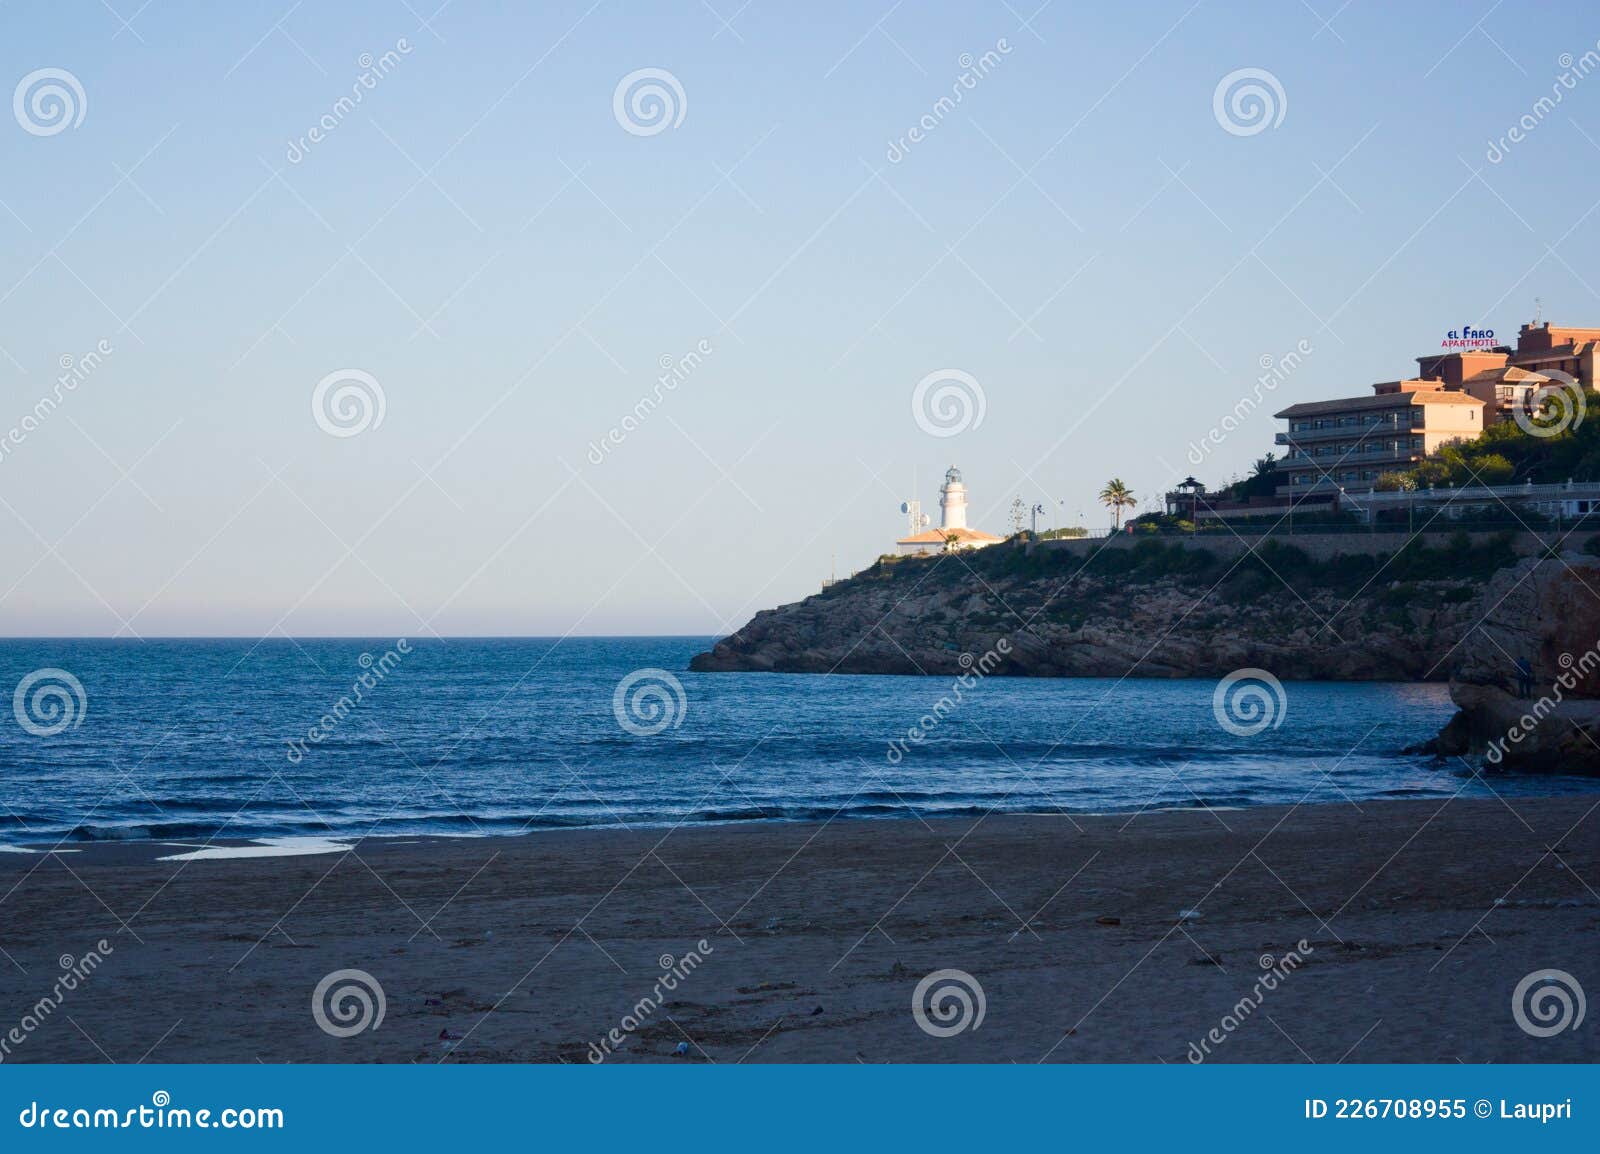 lighthouse of the dosel beach in the coastal town of cullera valencia